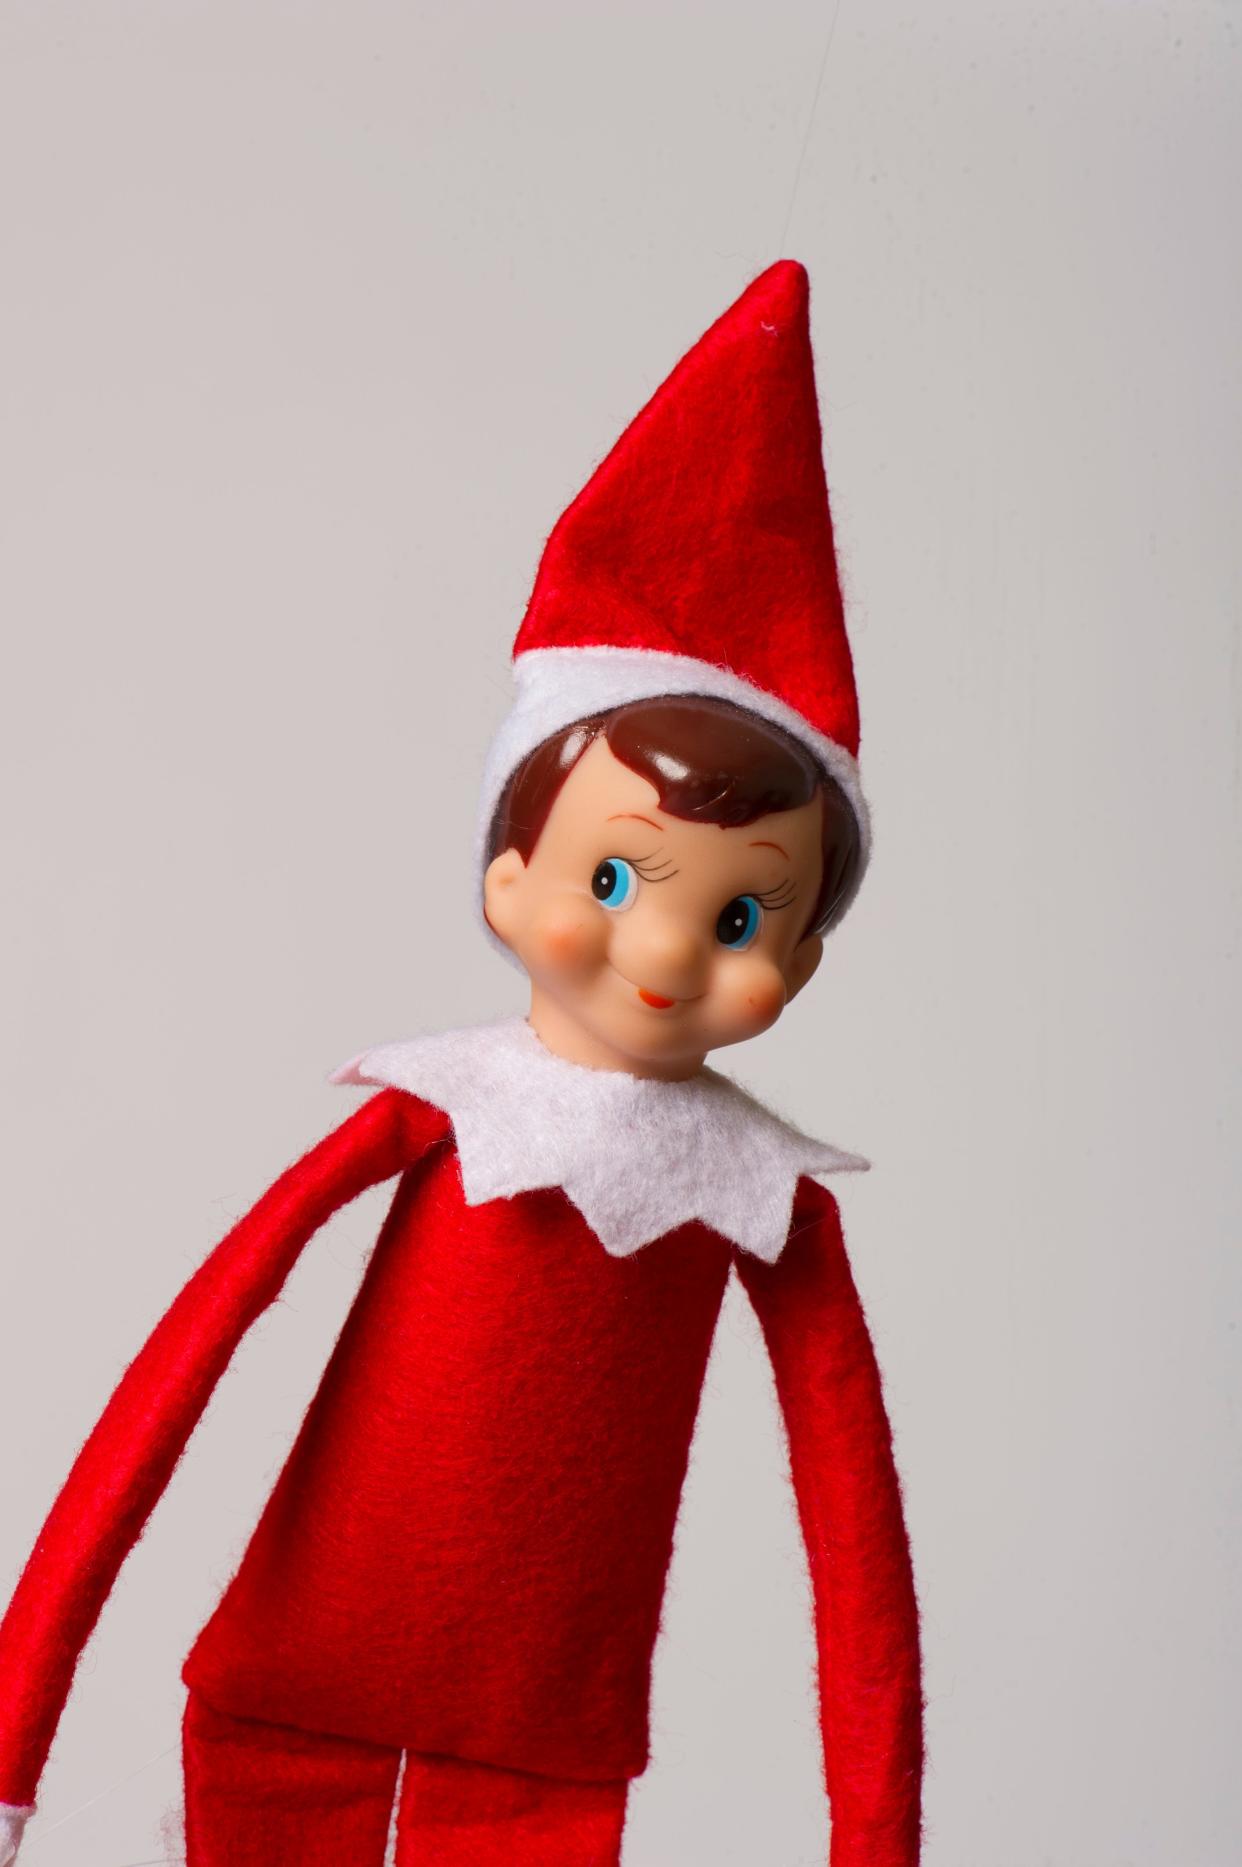 A Scout Elf from "Elf on the Shelf."